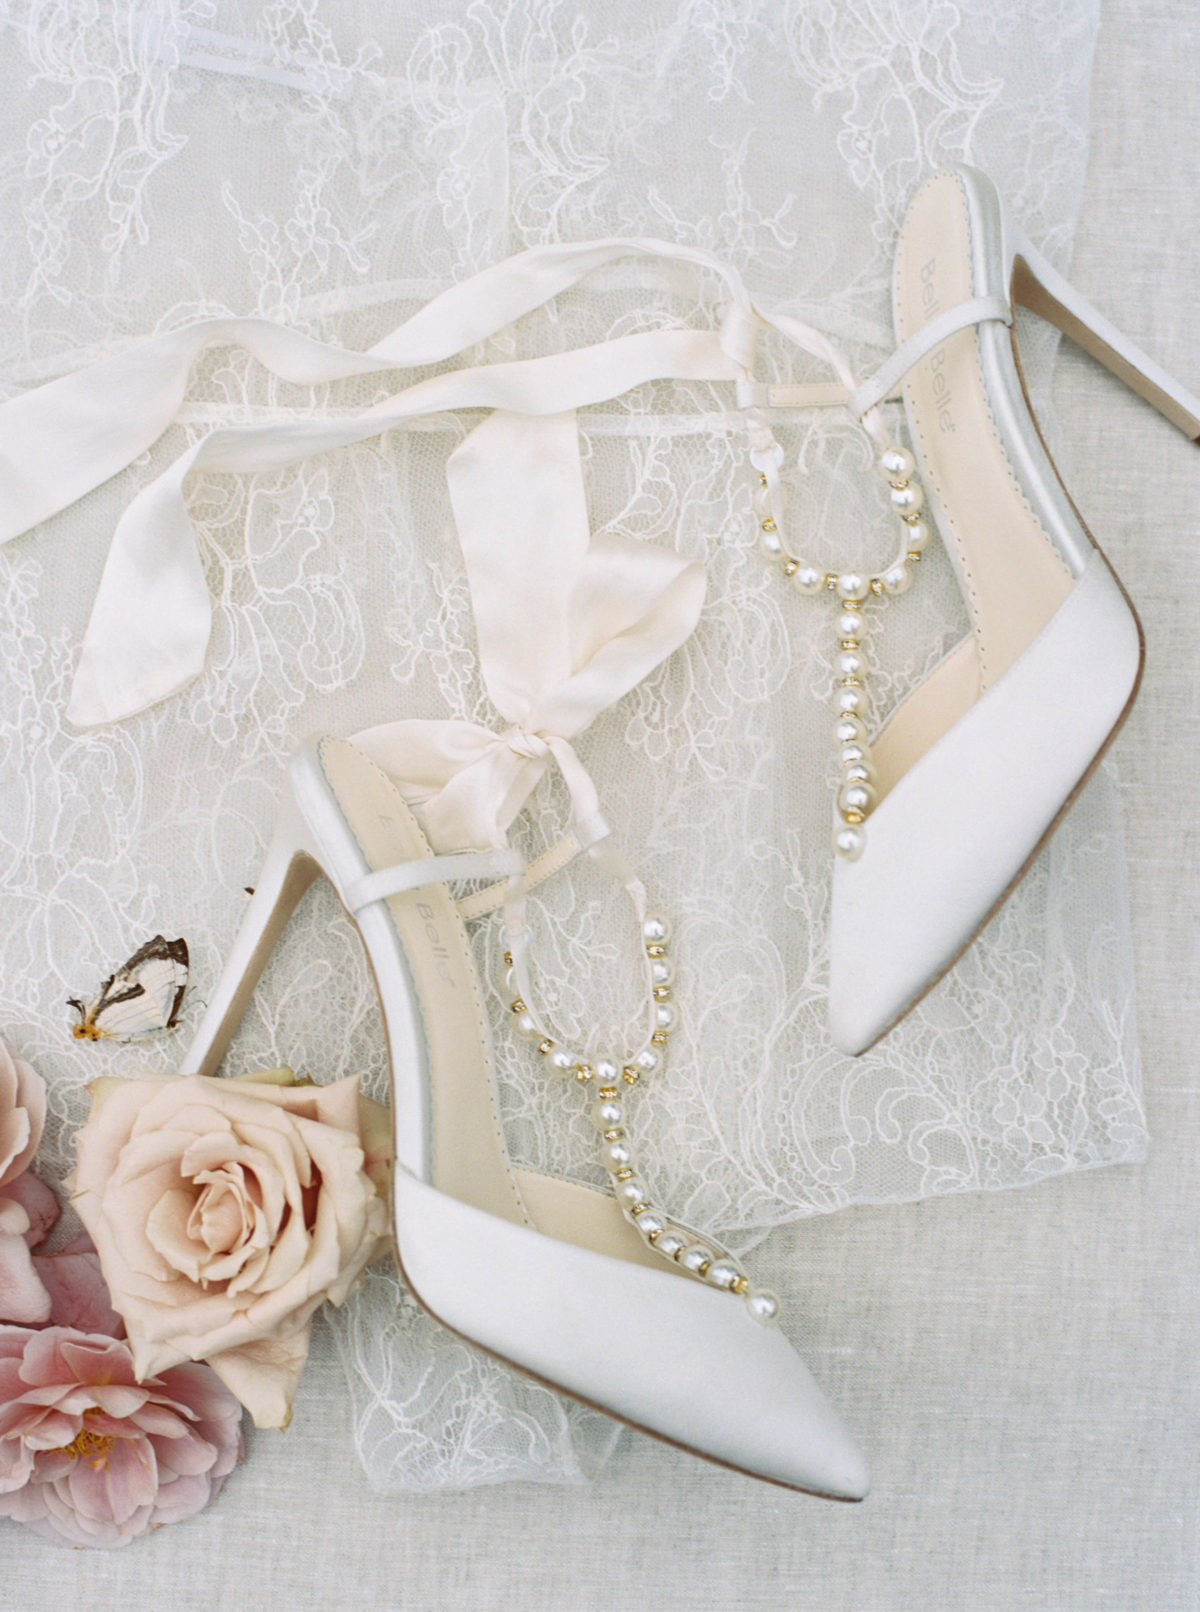 Ivory pearl wedding shoes by Bella Belle.